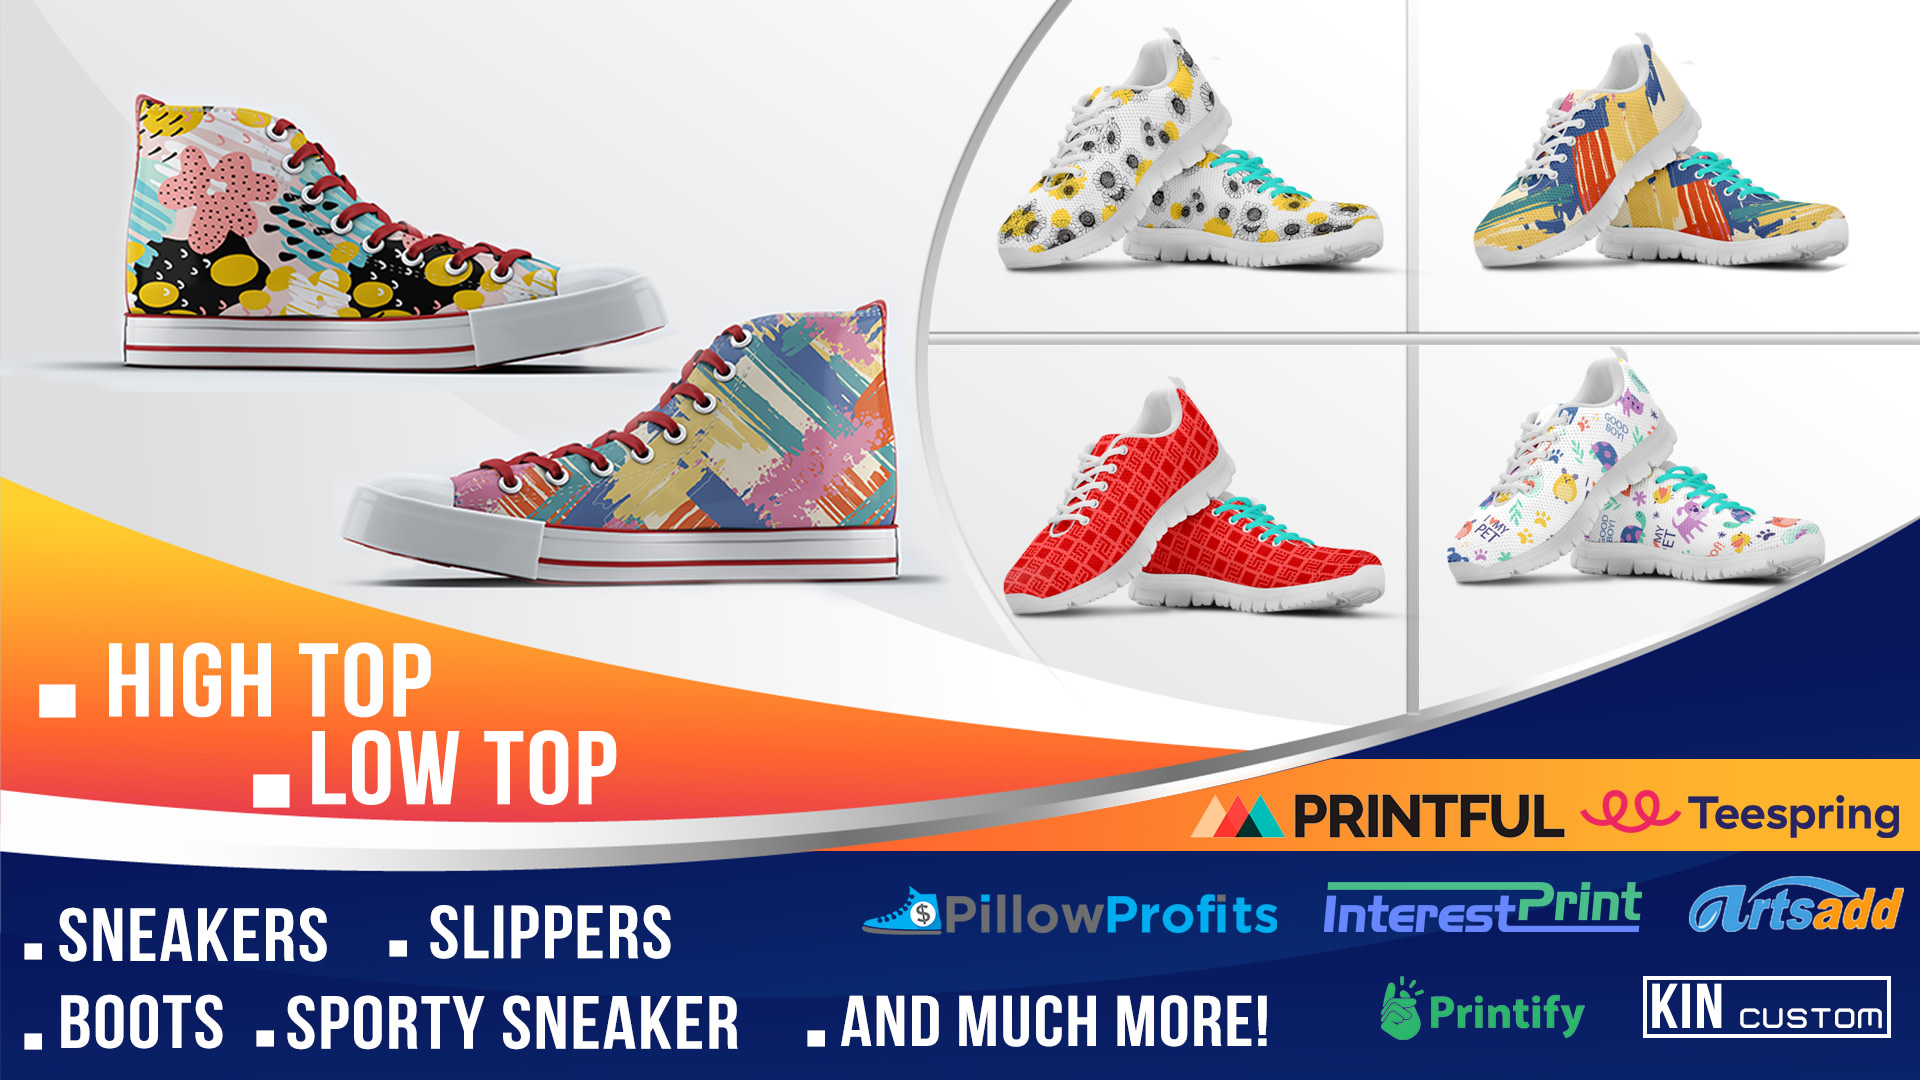 Customizable Design Templates for trendy shoes and sneaker of any pod